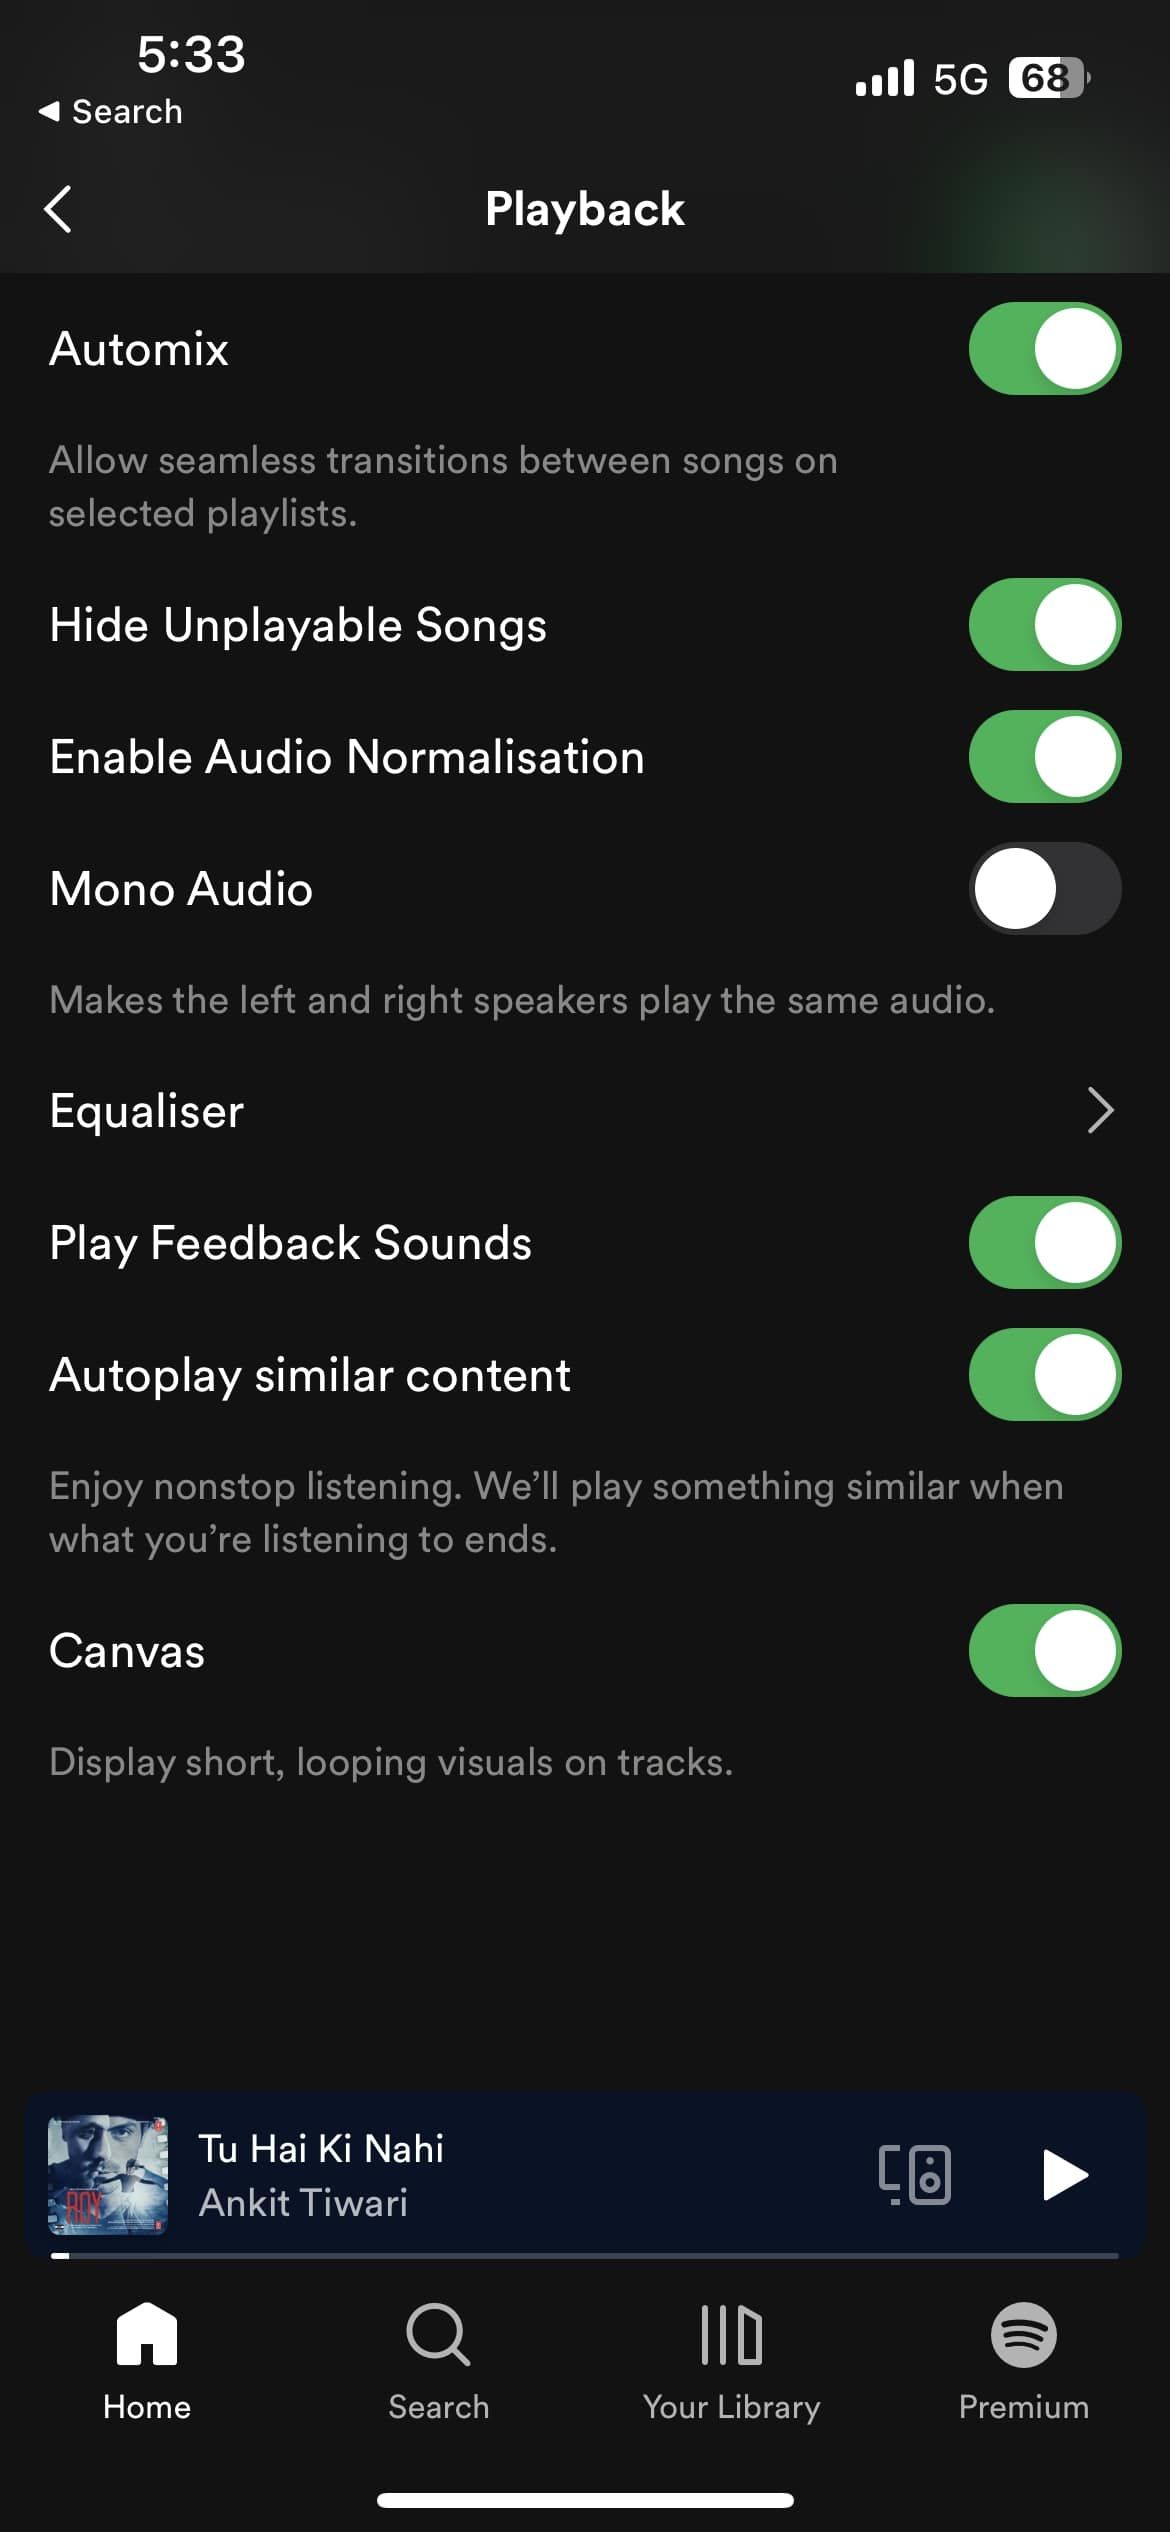 How to Enable or Disable Canvas in Spotify